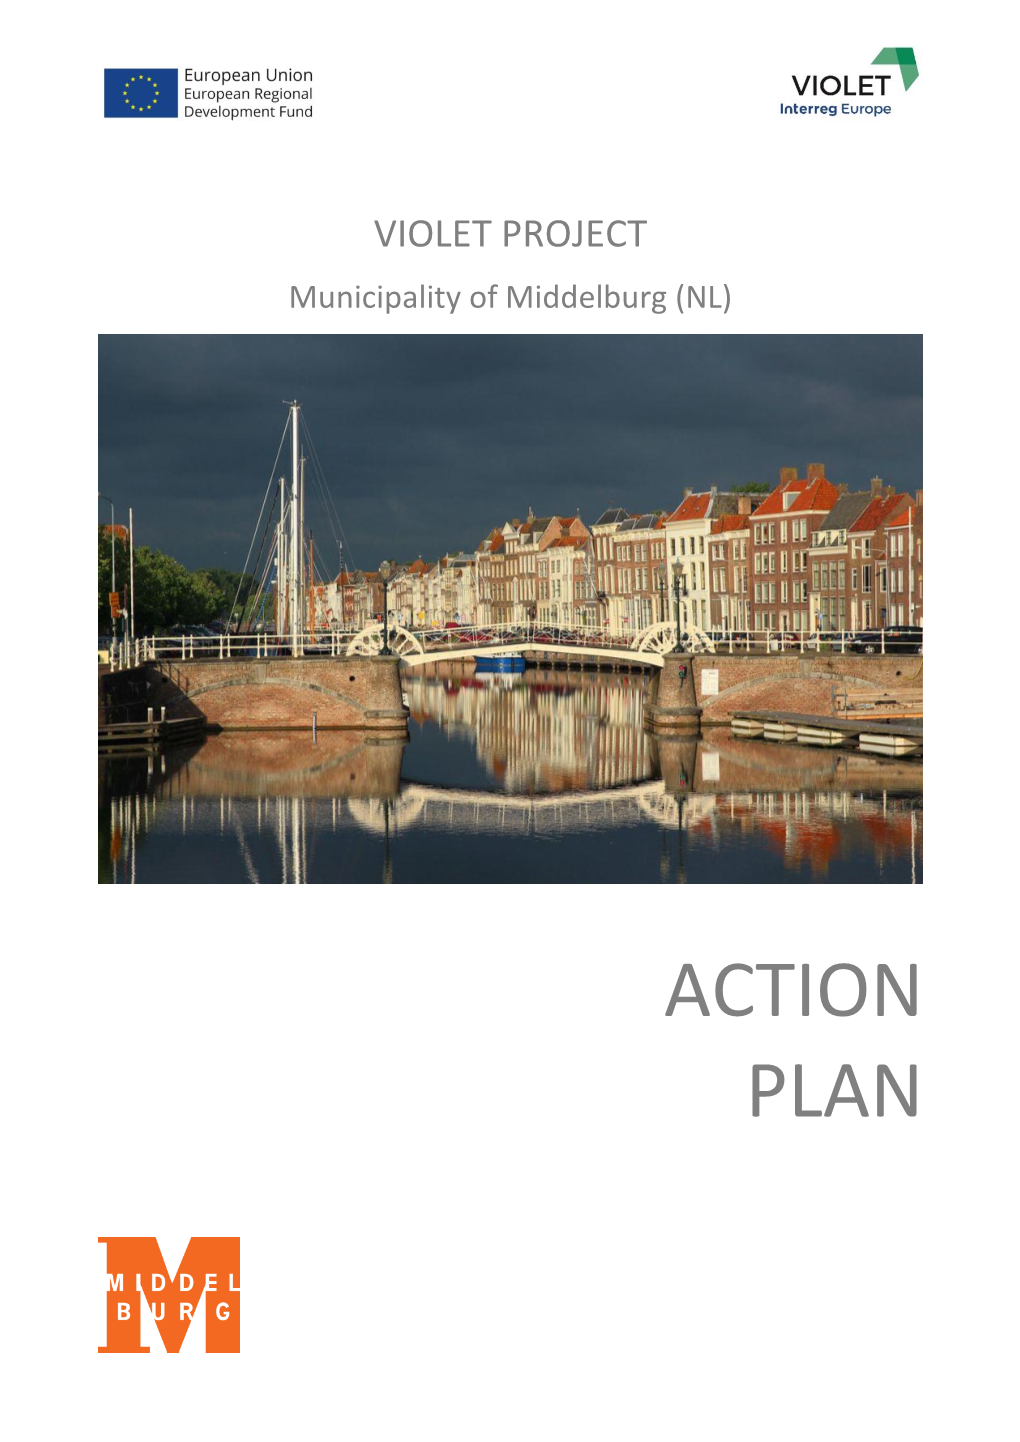 Action Plans, Stemming from the Work Carried out Throughout the VIOLET Project, Aim to Raise Awareness on This Important Subject Matter